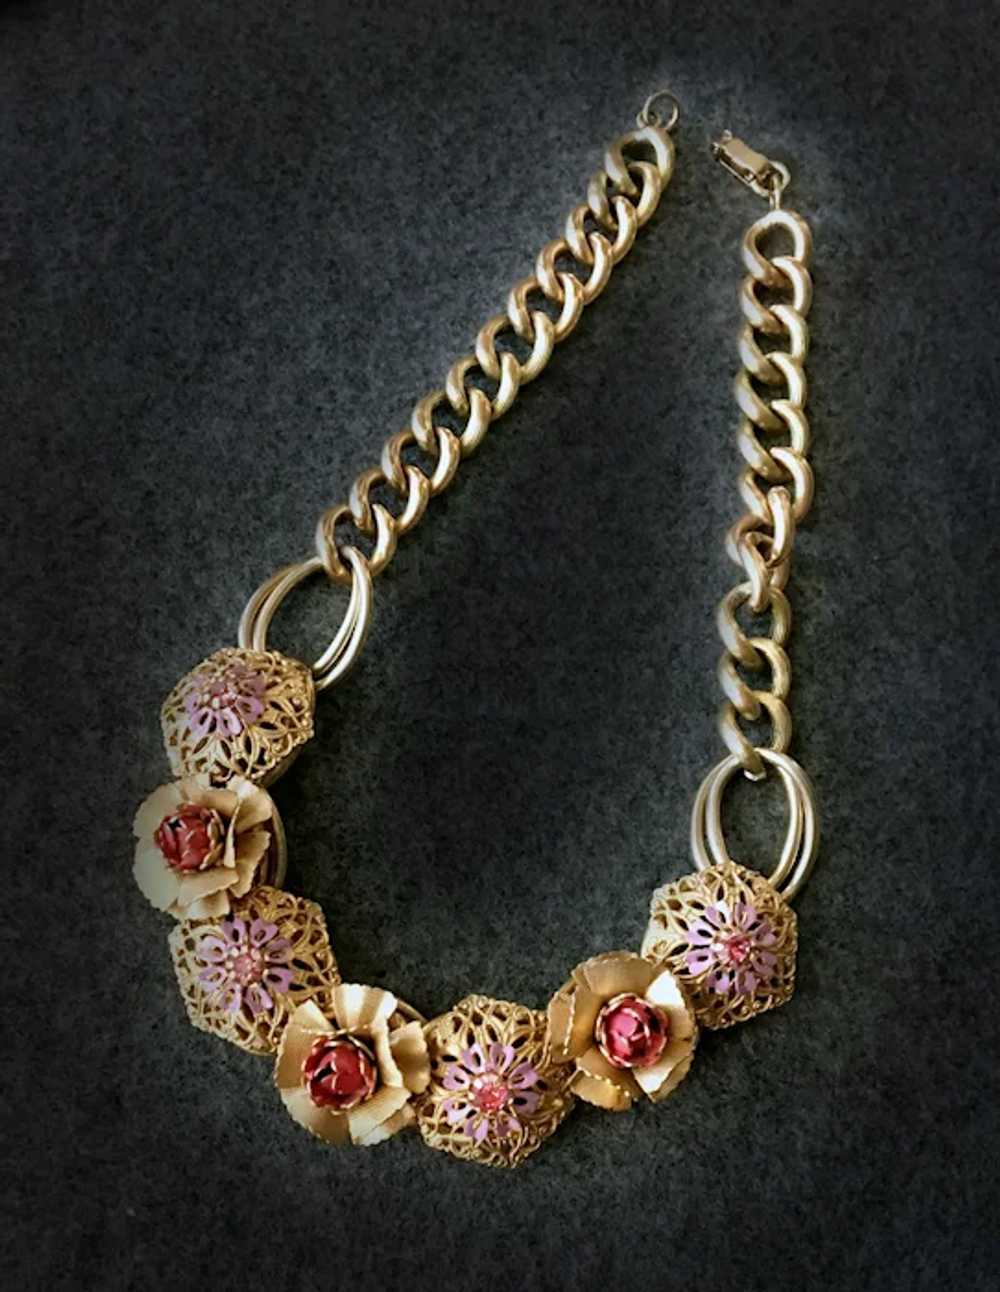 Victorian Revival Flower and Filigree Necklace & … - image 5